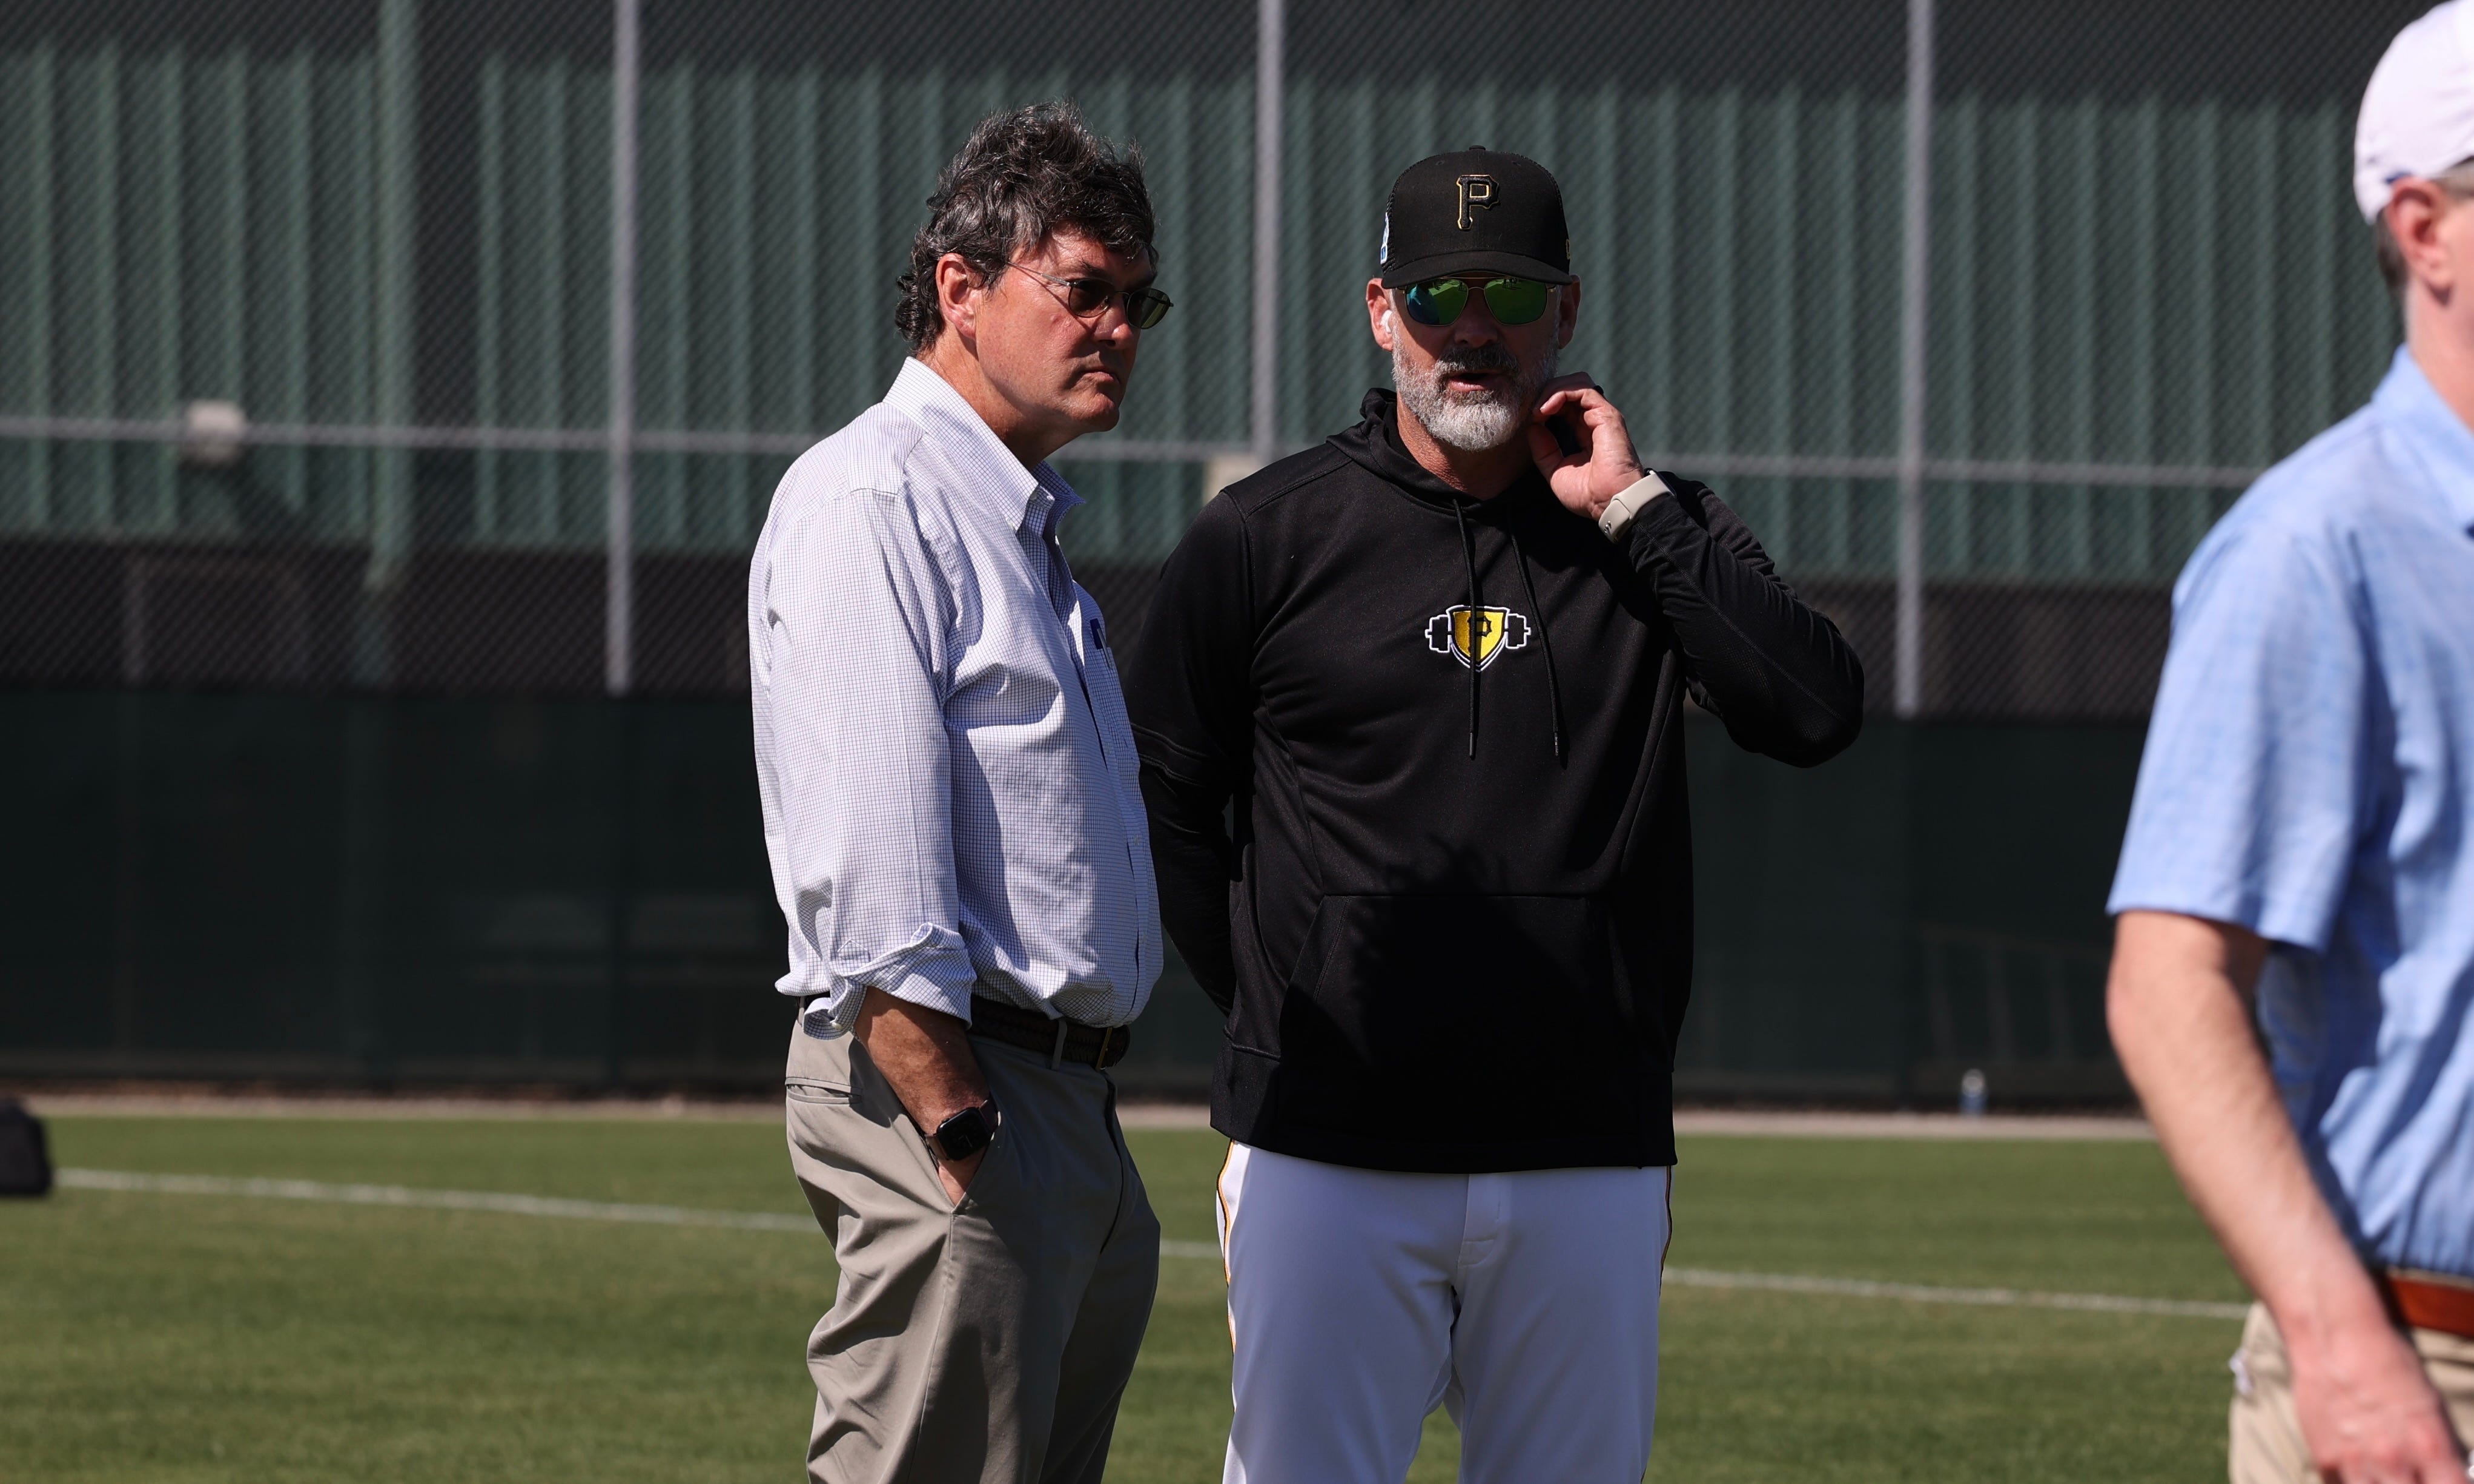 Pirates manager Shelton embracing higher stakes in 2023